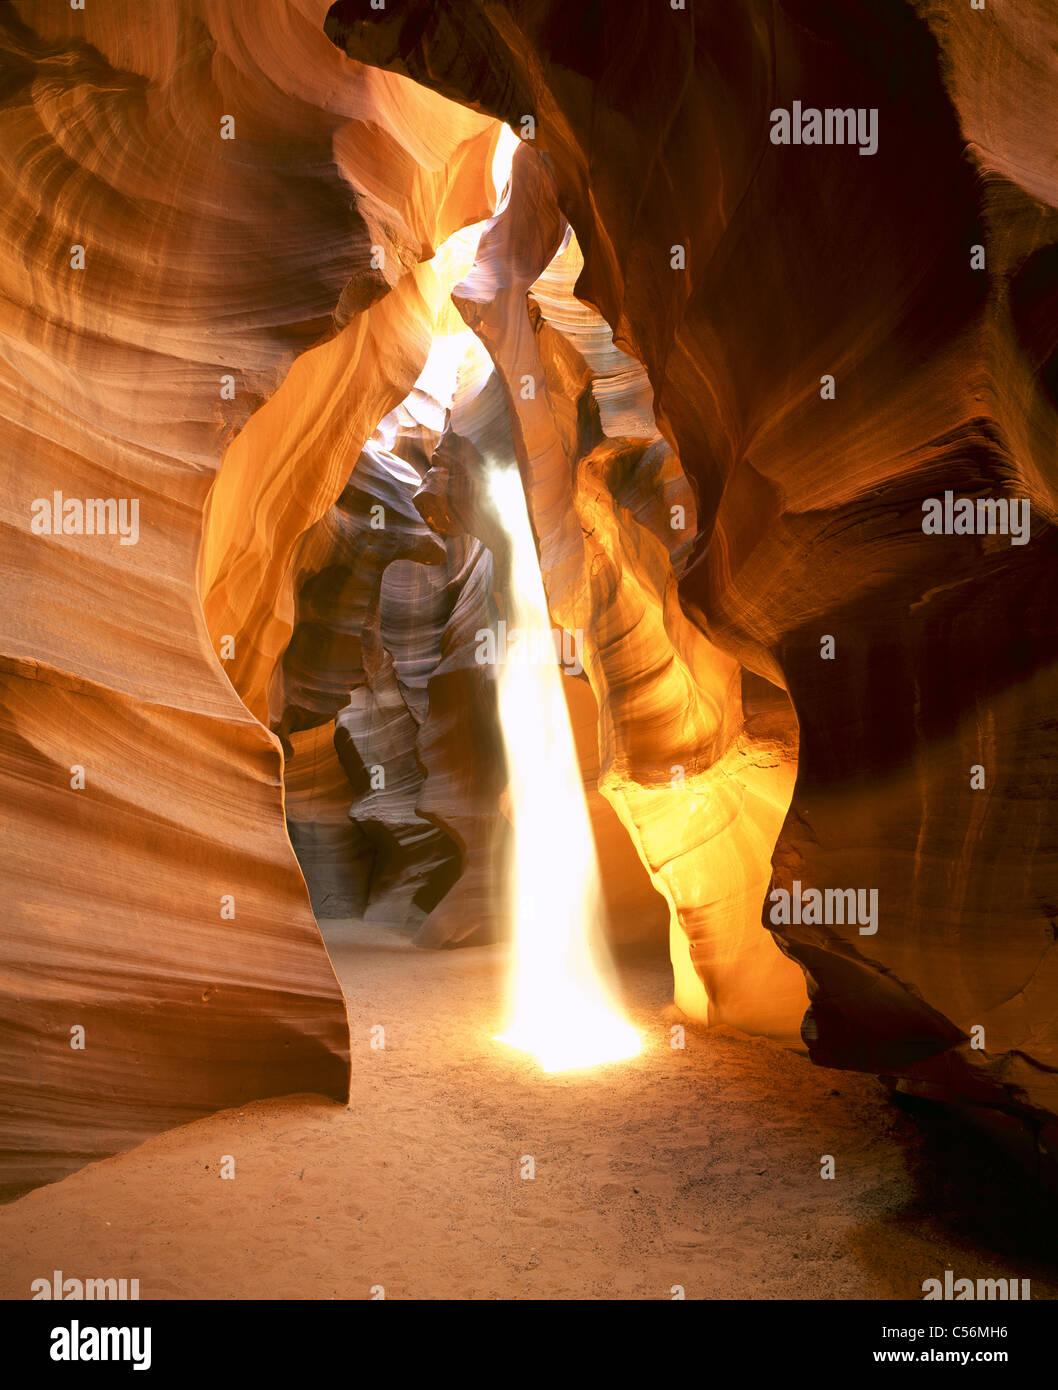 In the summer, rays of sunlight create ghostly appearances in this dusty slot canyon. Upper Antelope Canyon, Coconino County, Arizona, USA. Stock Photo